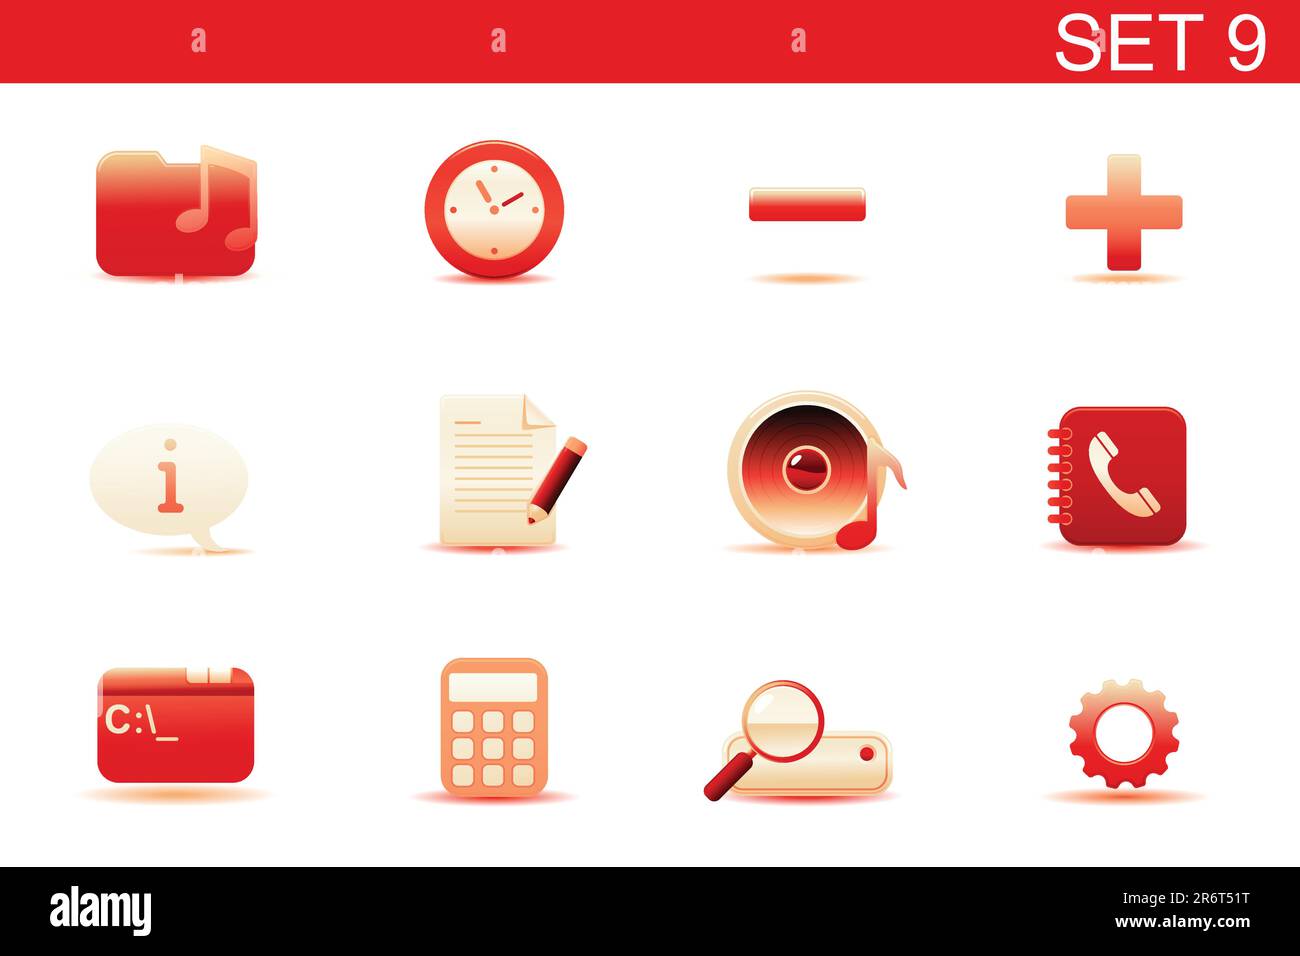 Vector illustration ? set of red elegant simple icons for common computer and media devices functions. Set-9 Stock Vector